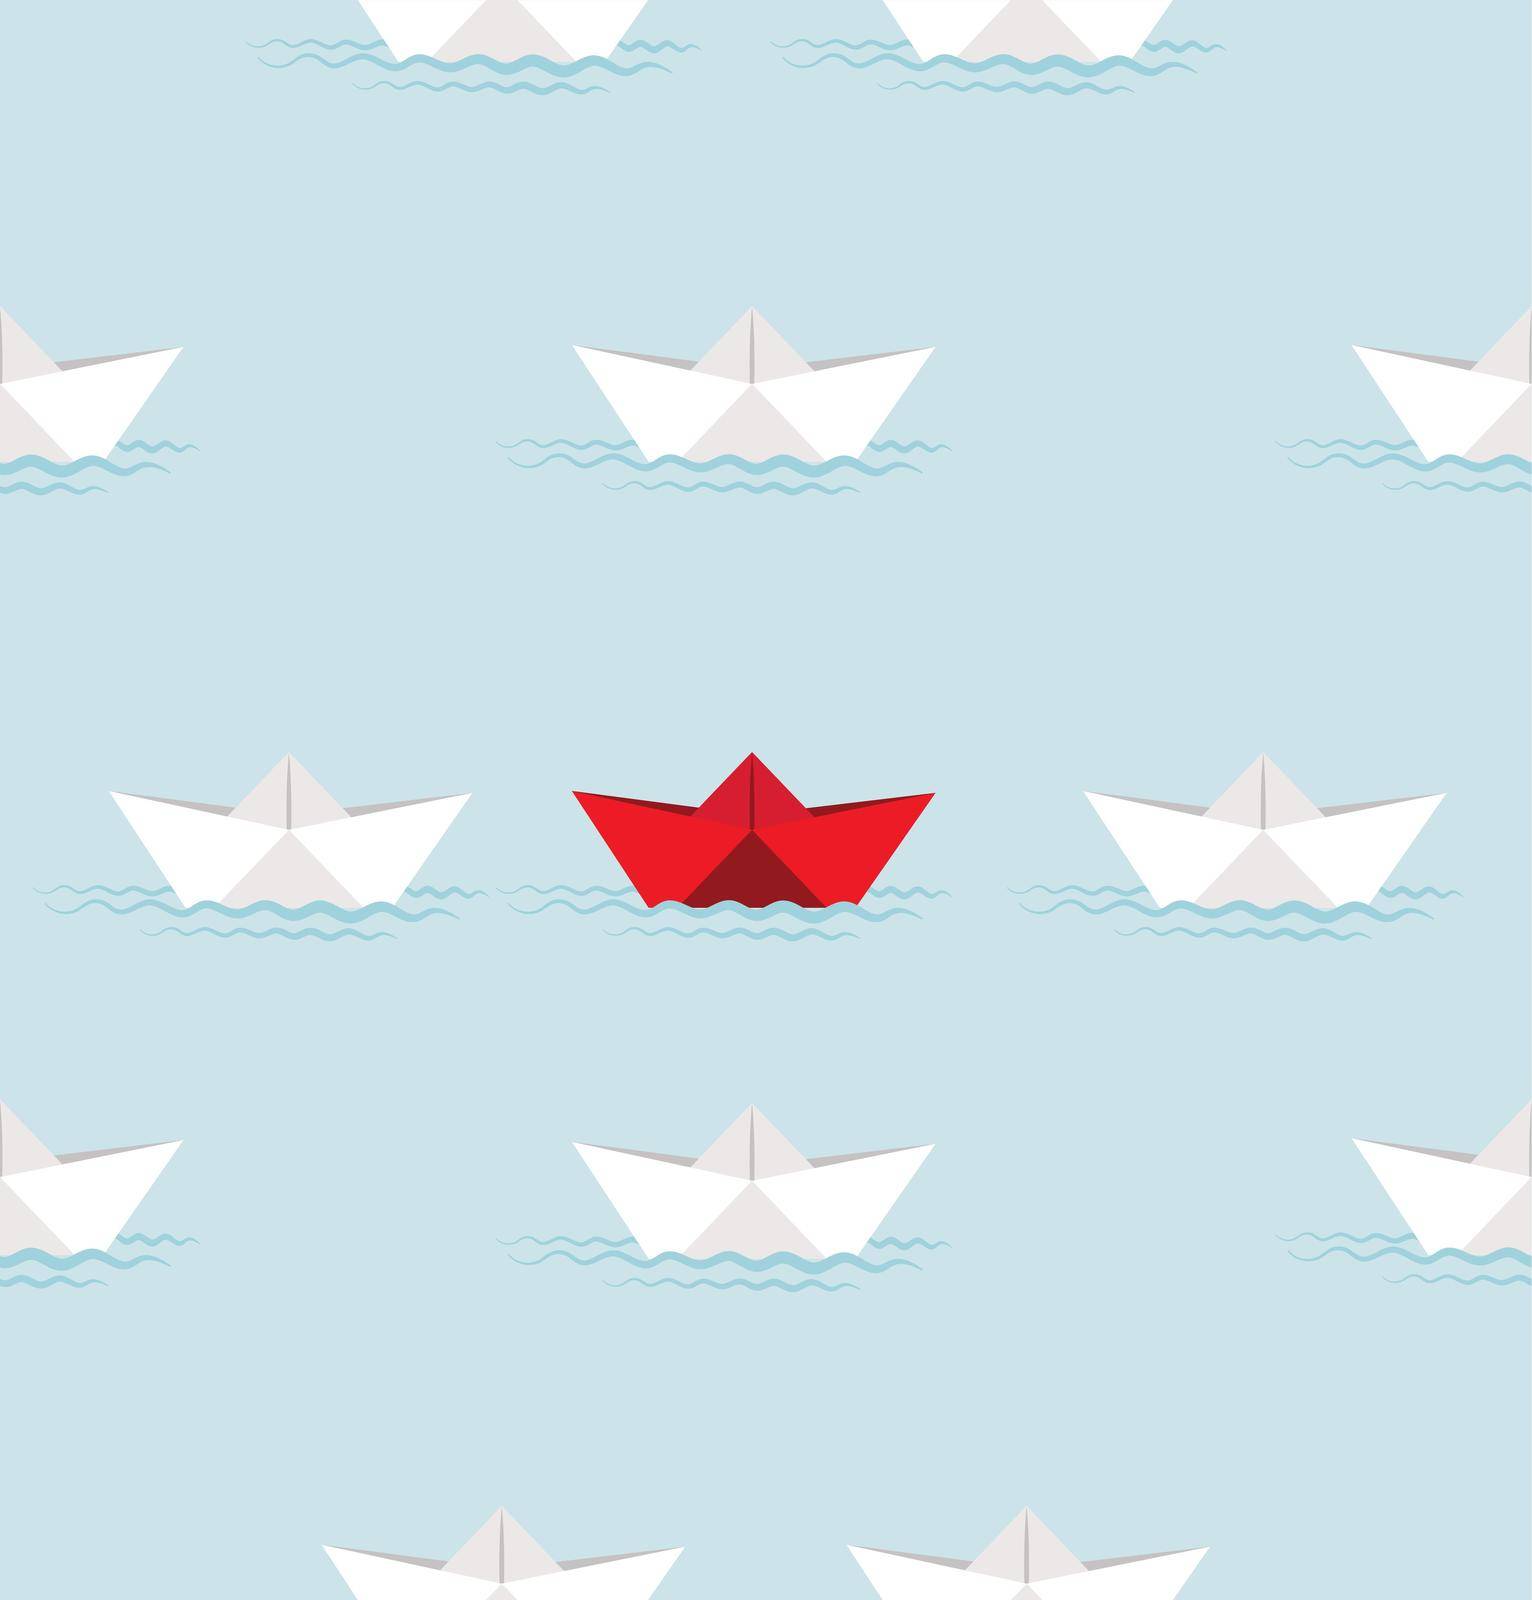 Red Paper boat and white paper boat  in water pattern